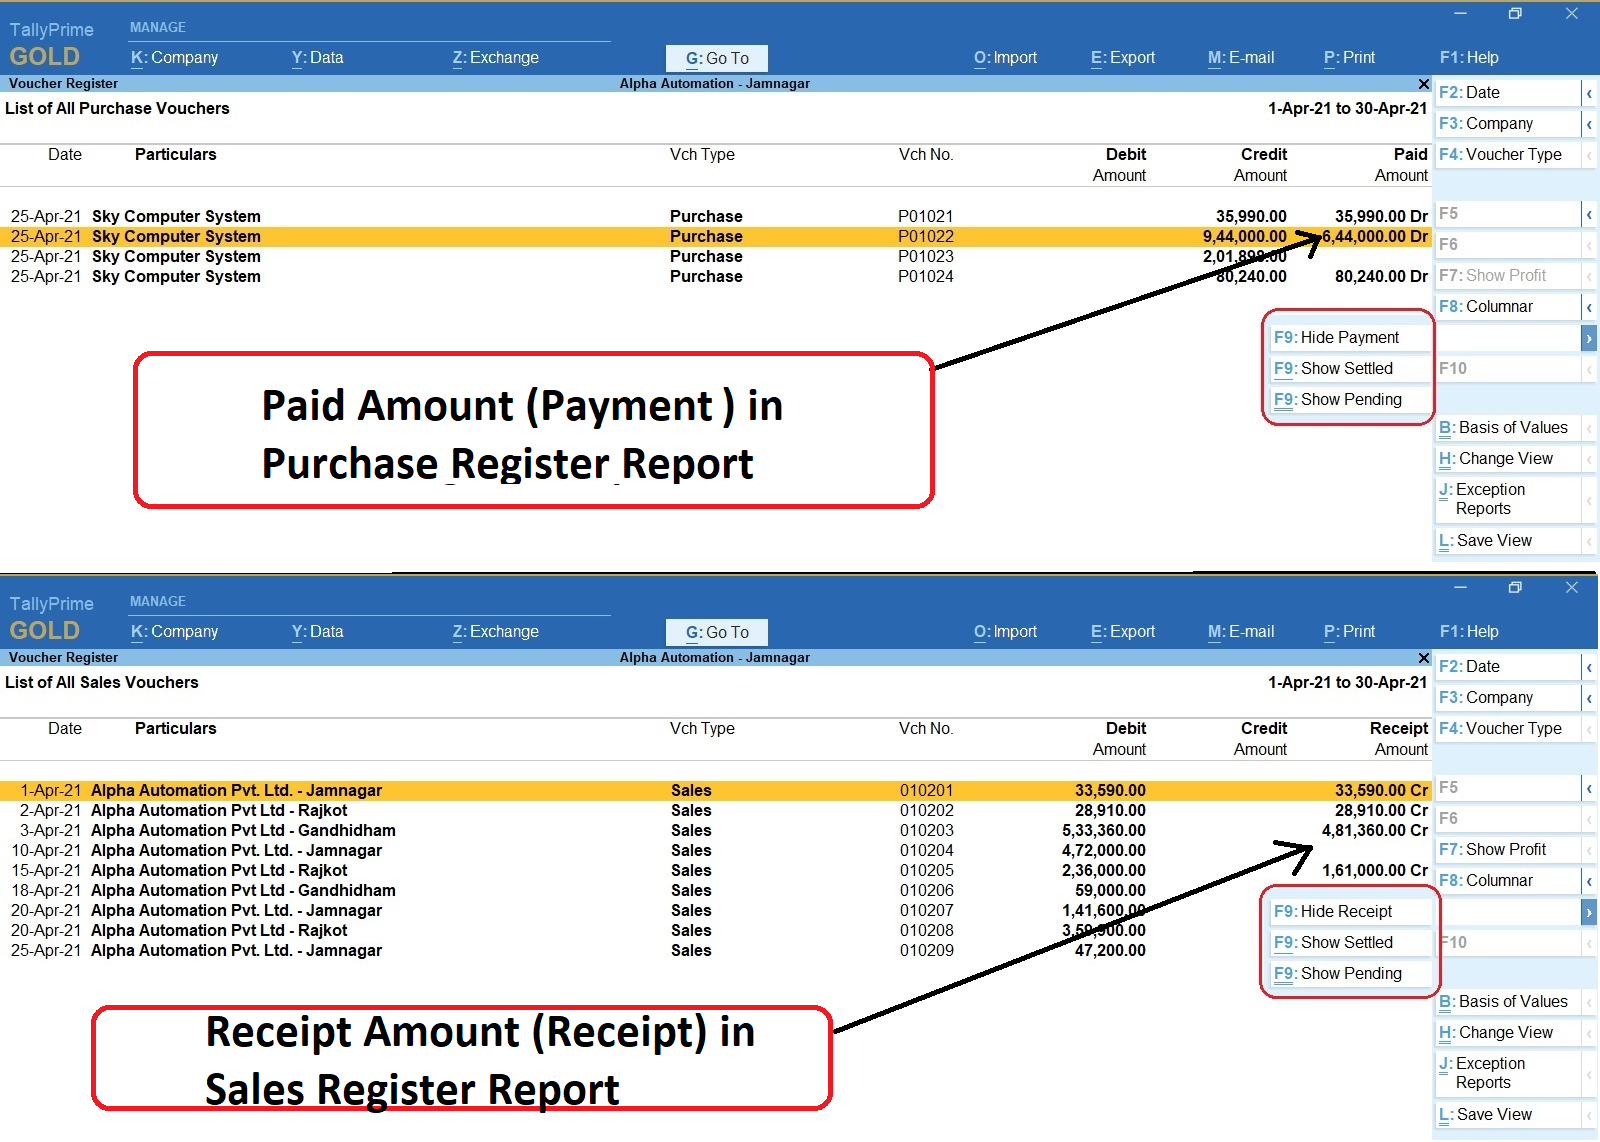 Show Receipt in Sales Register and Payment in Purchase Register